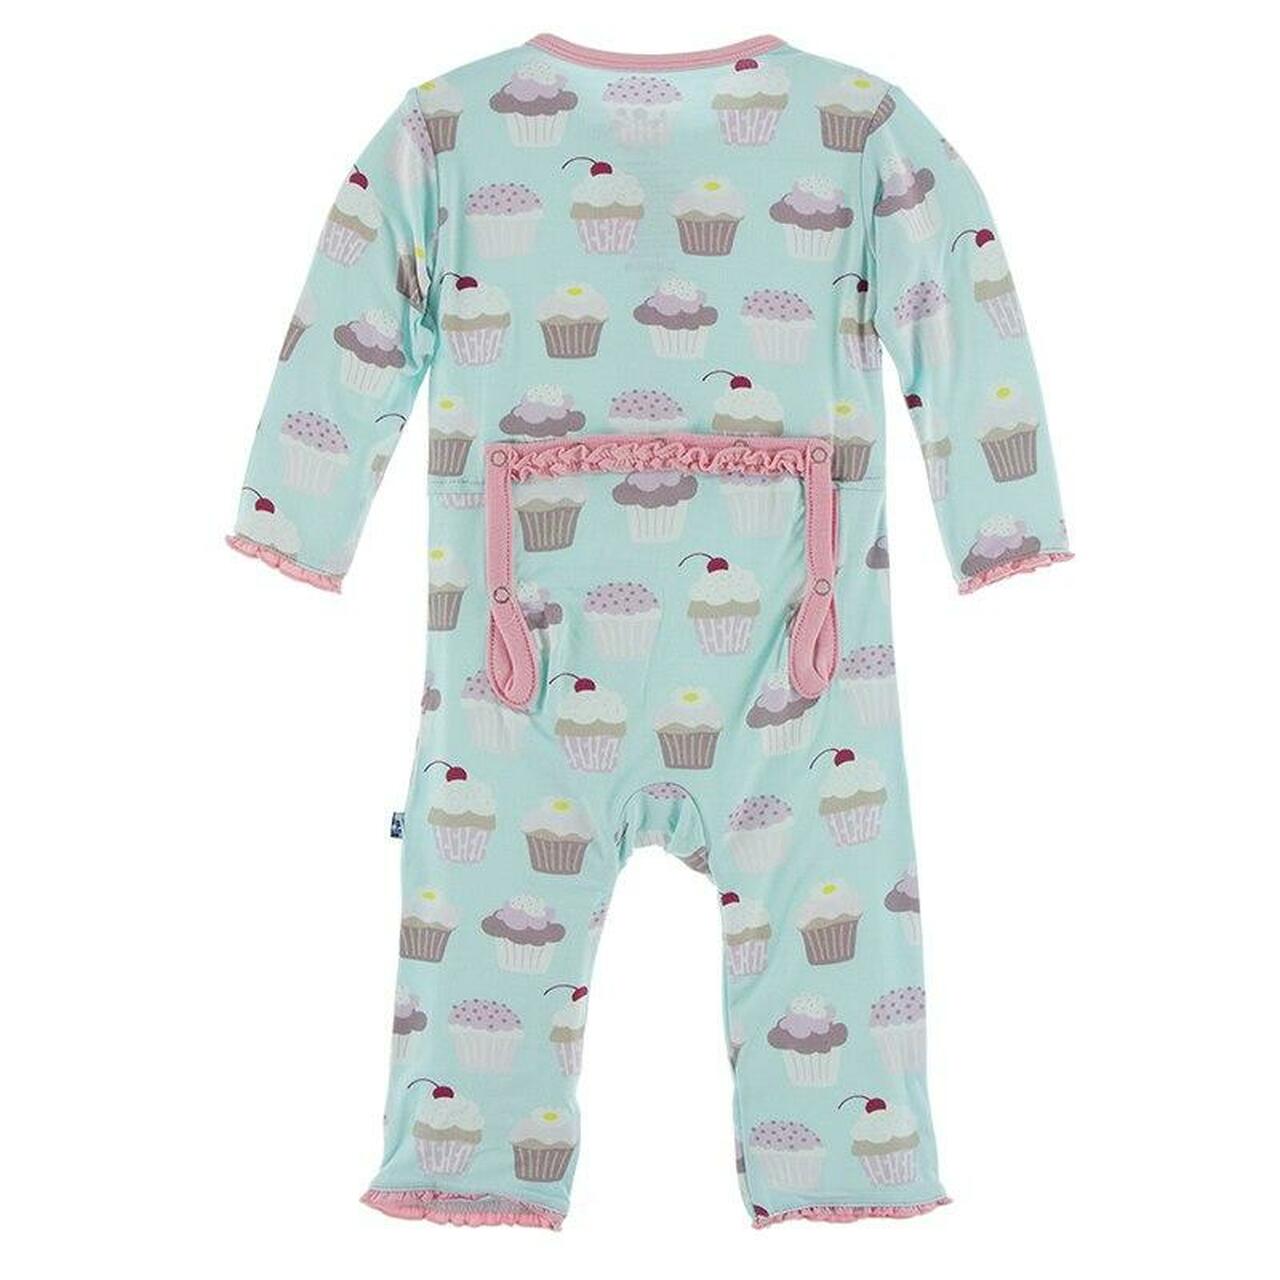 Summer Sky Cupcakes Ruffle Coverall w/ Snaps